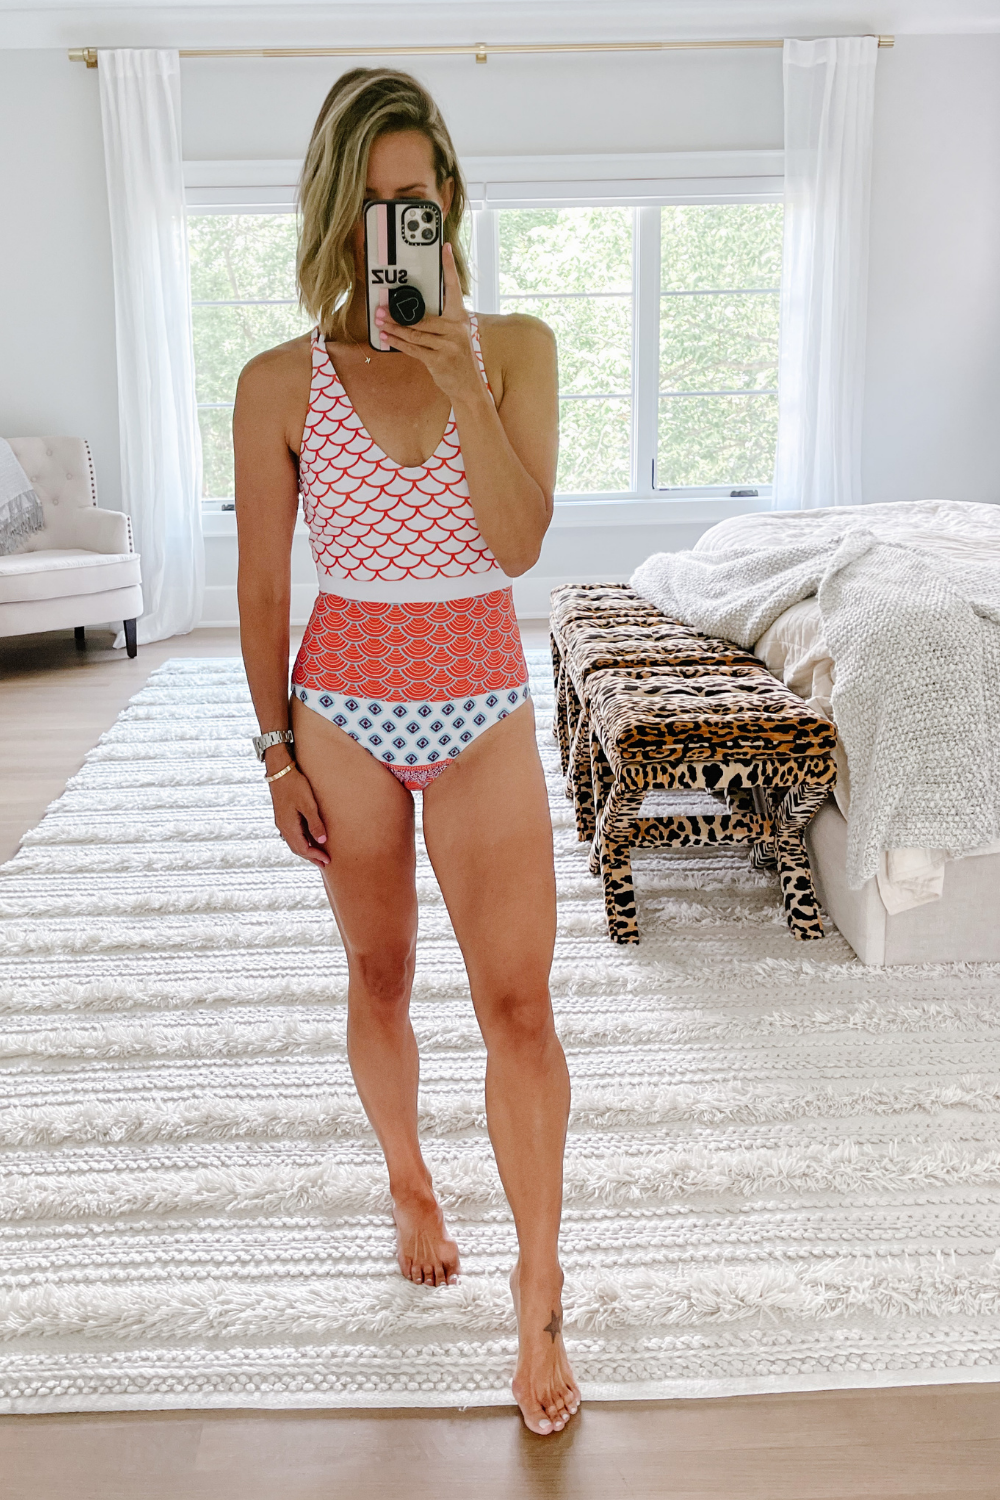 Suzanne wearing a printed Amazon one piece swimsuit